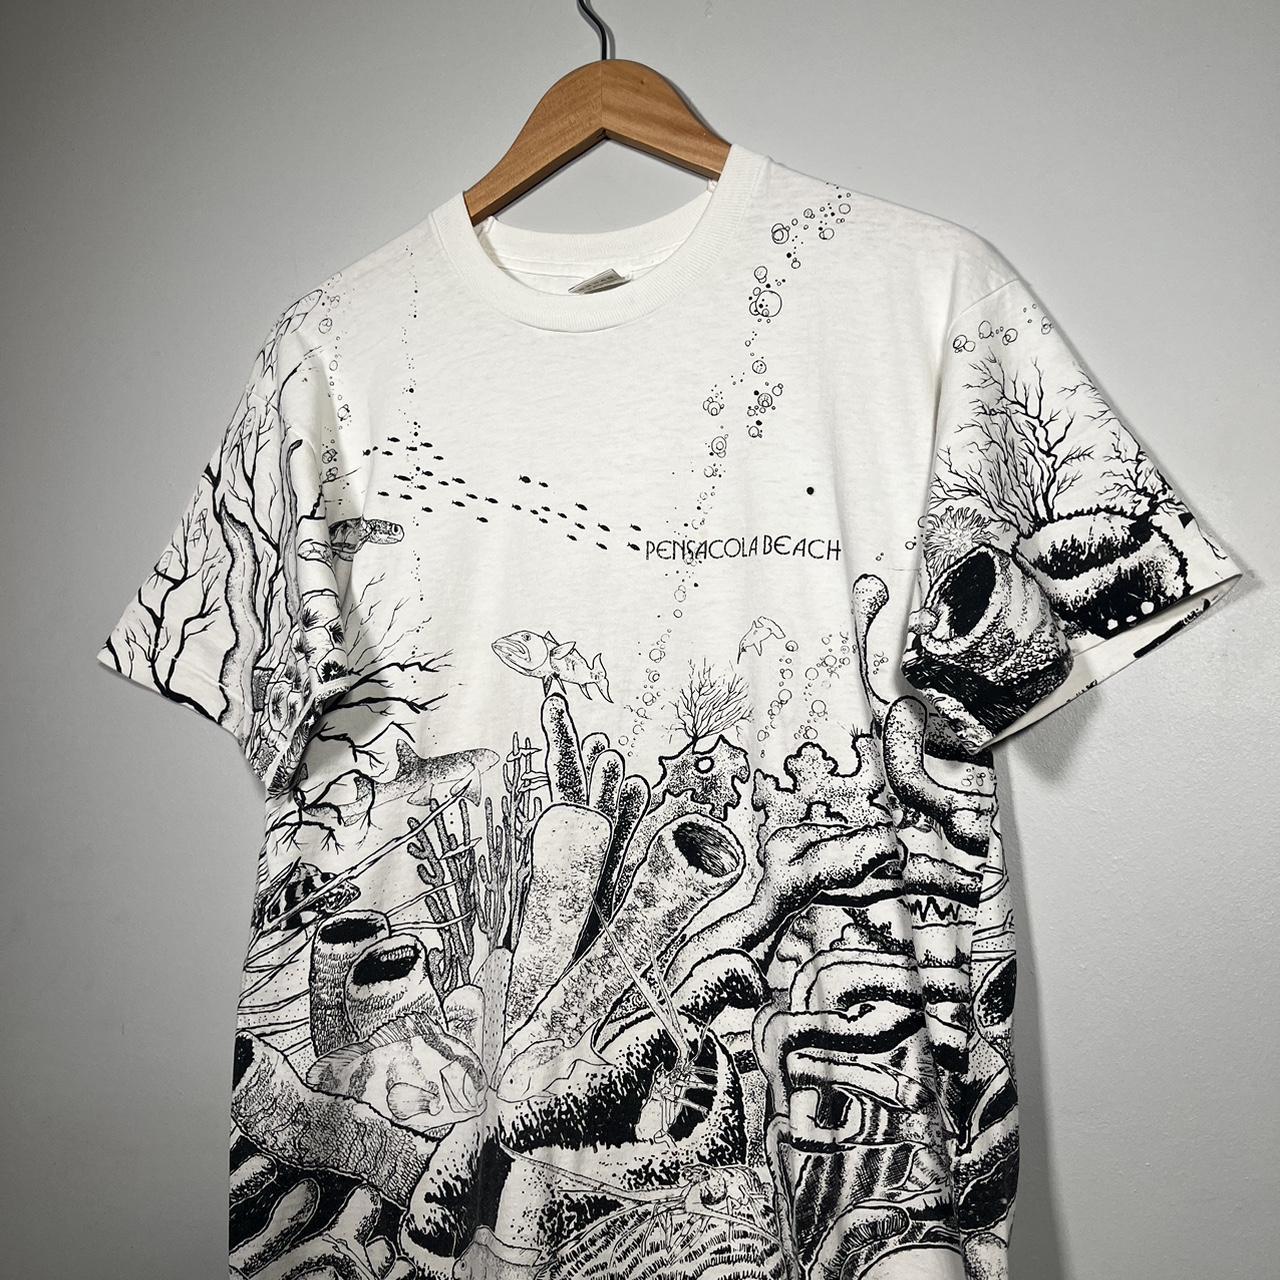 VINTAGE CORAL REEF AOP FISH BEACH T SHIRT., In a